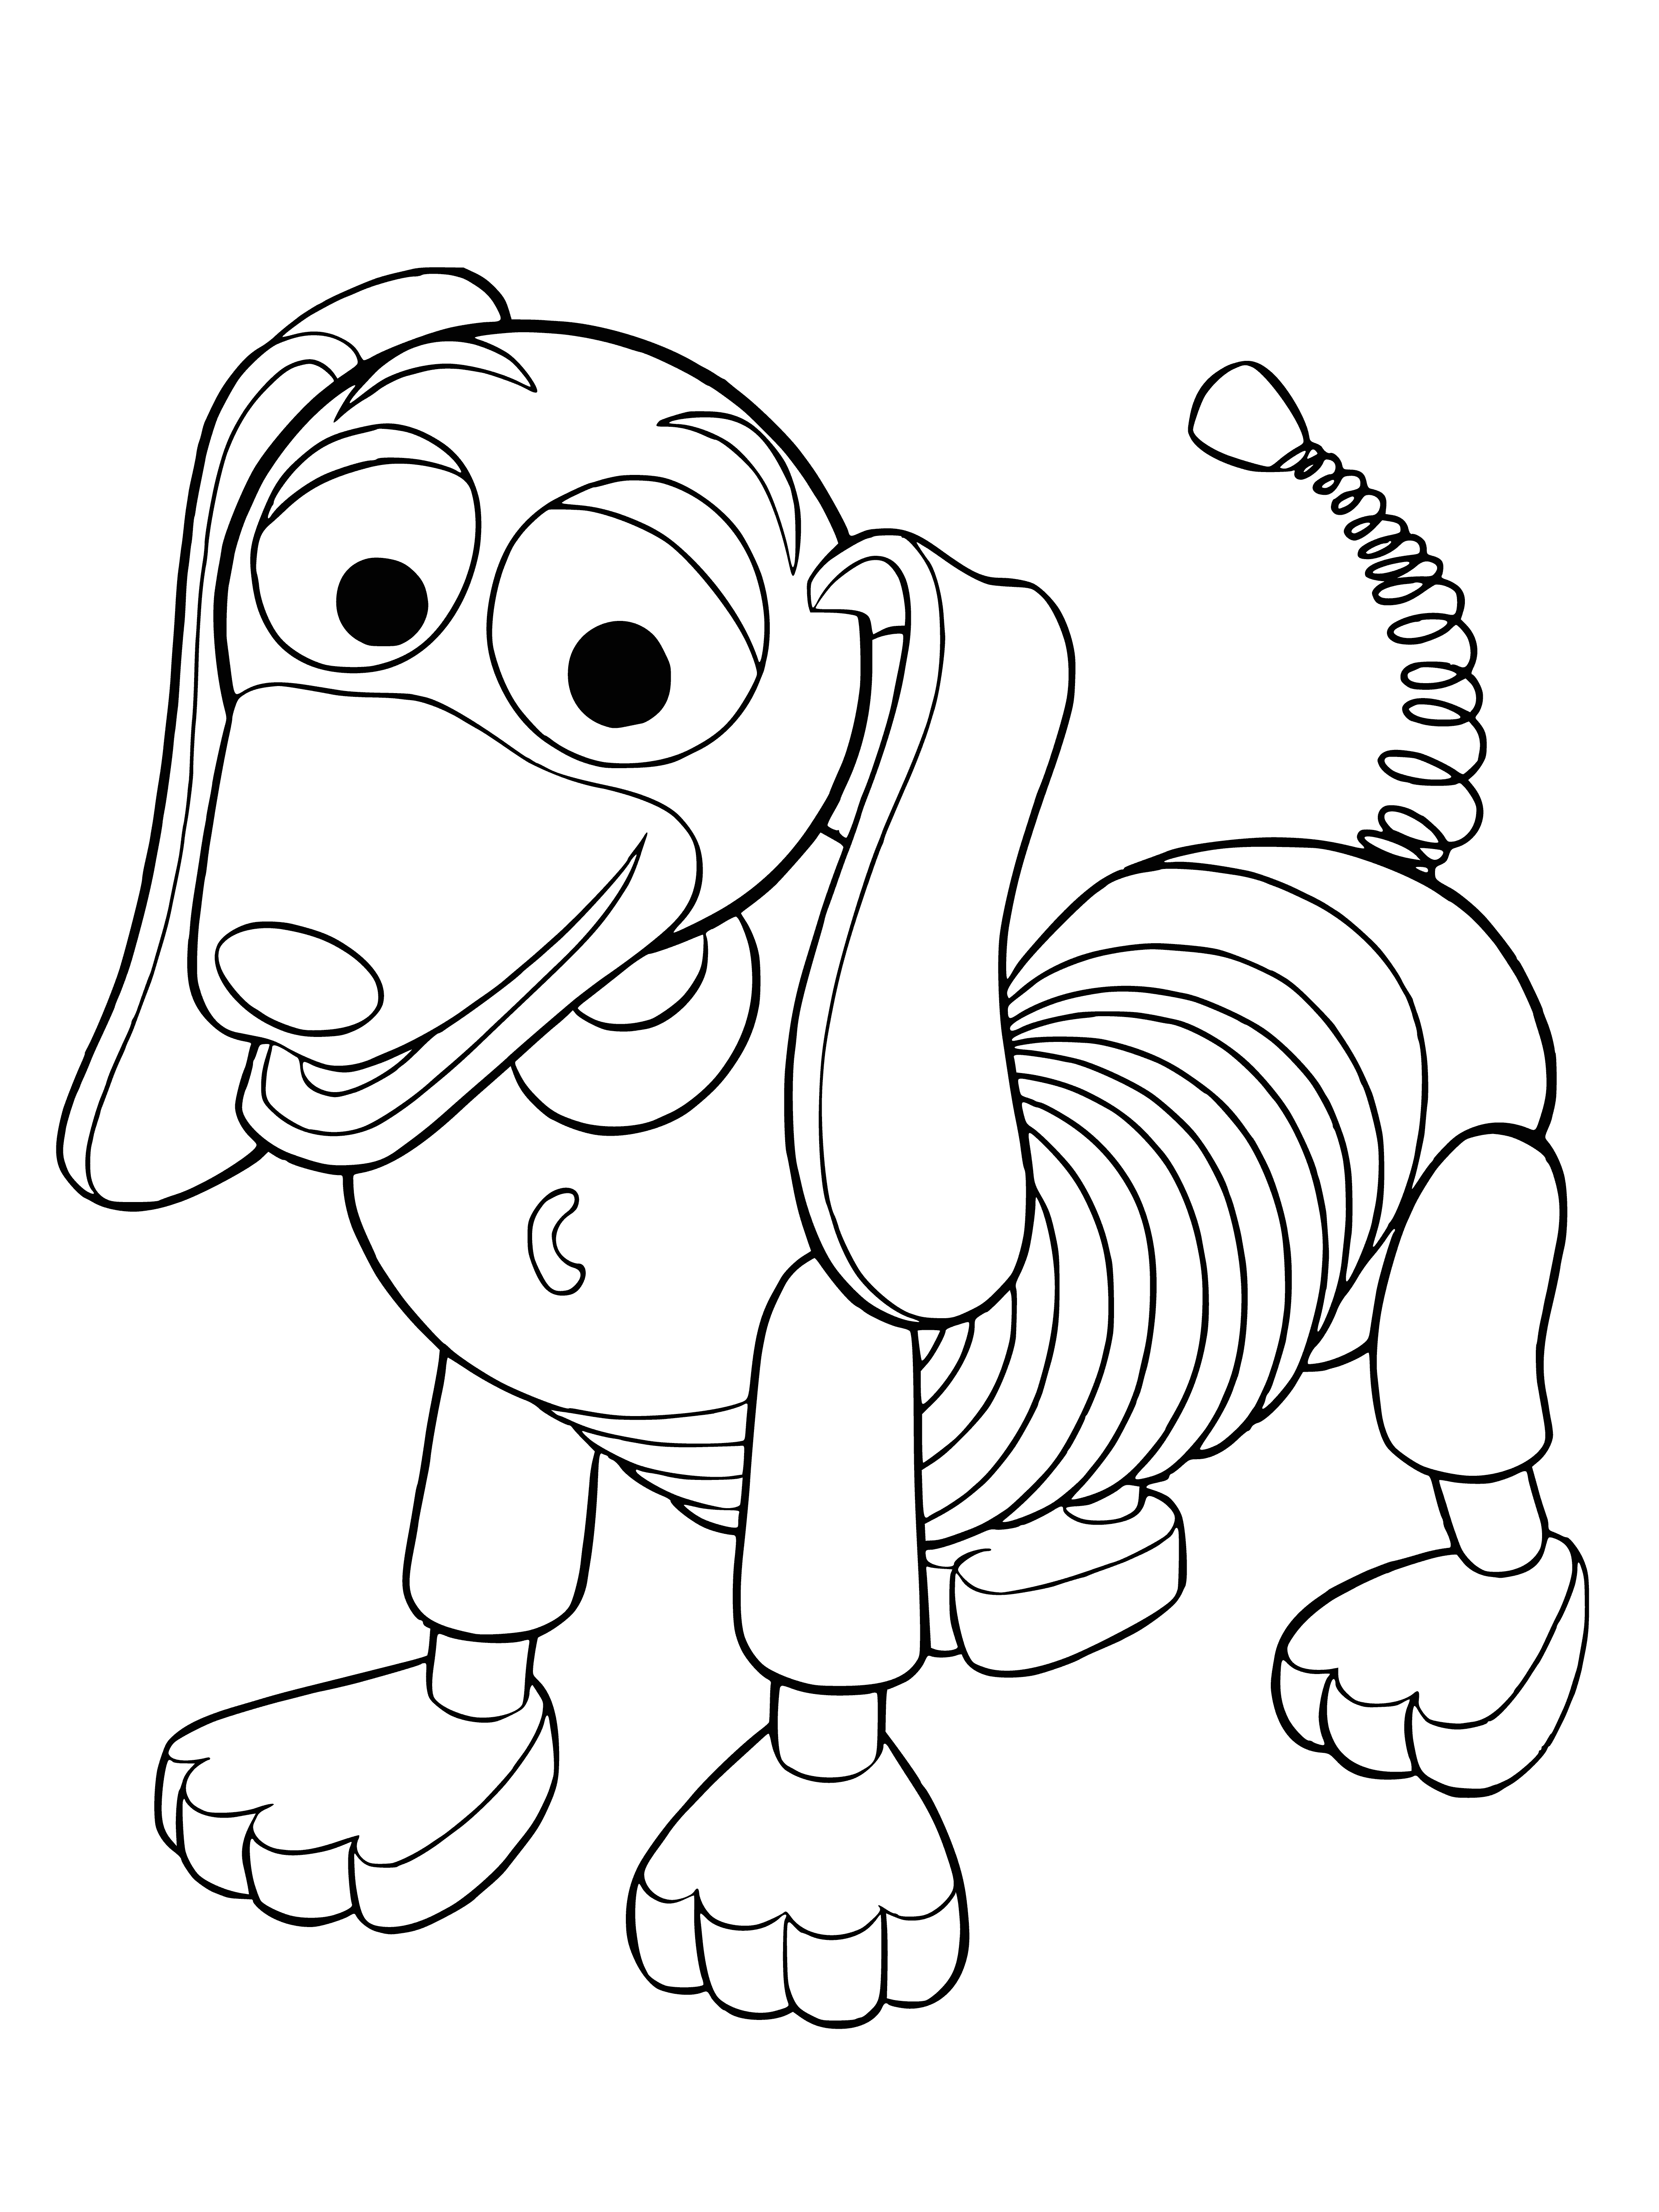 Spiral dog coloring page